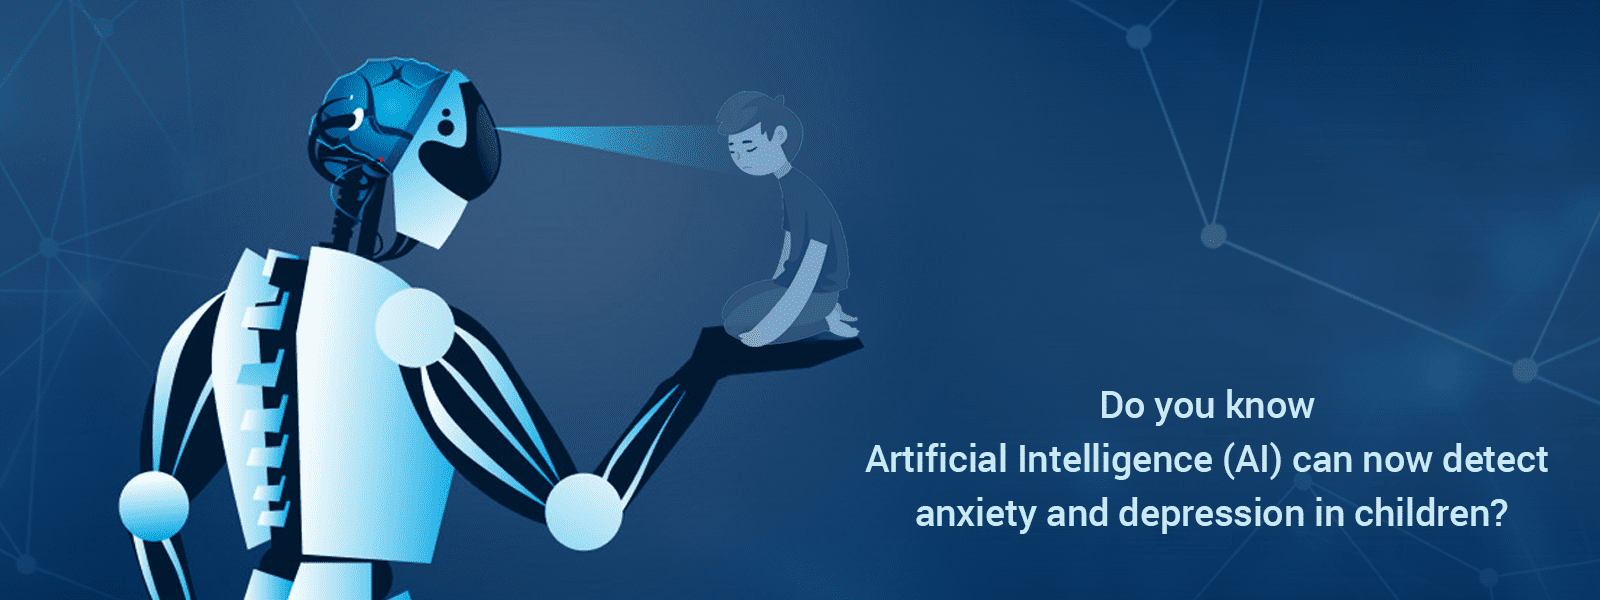 Do you know Artificial Intelligence (AI) can now detect anxiety and depression in children?